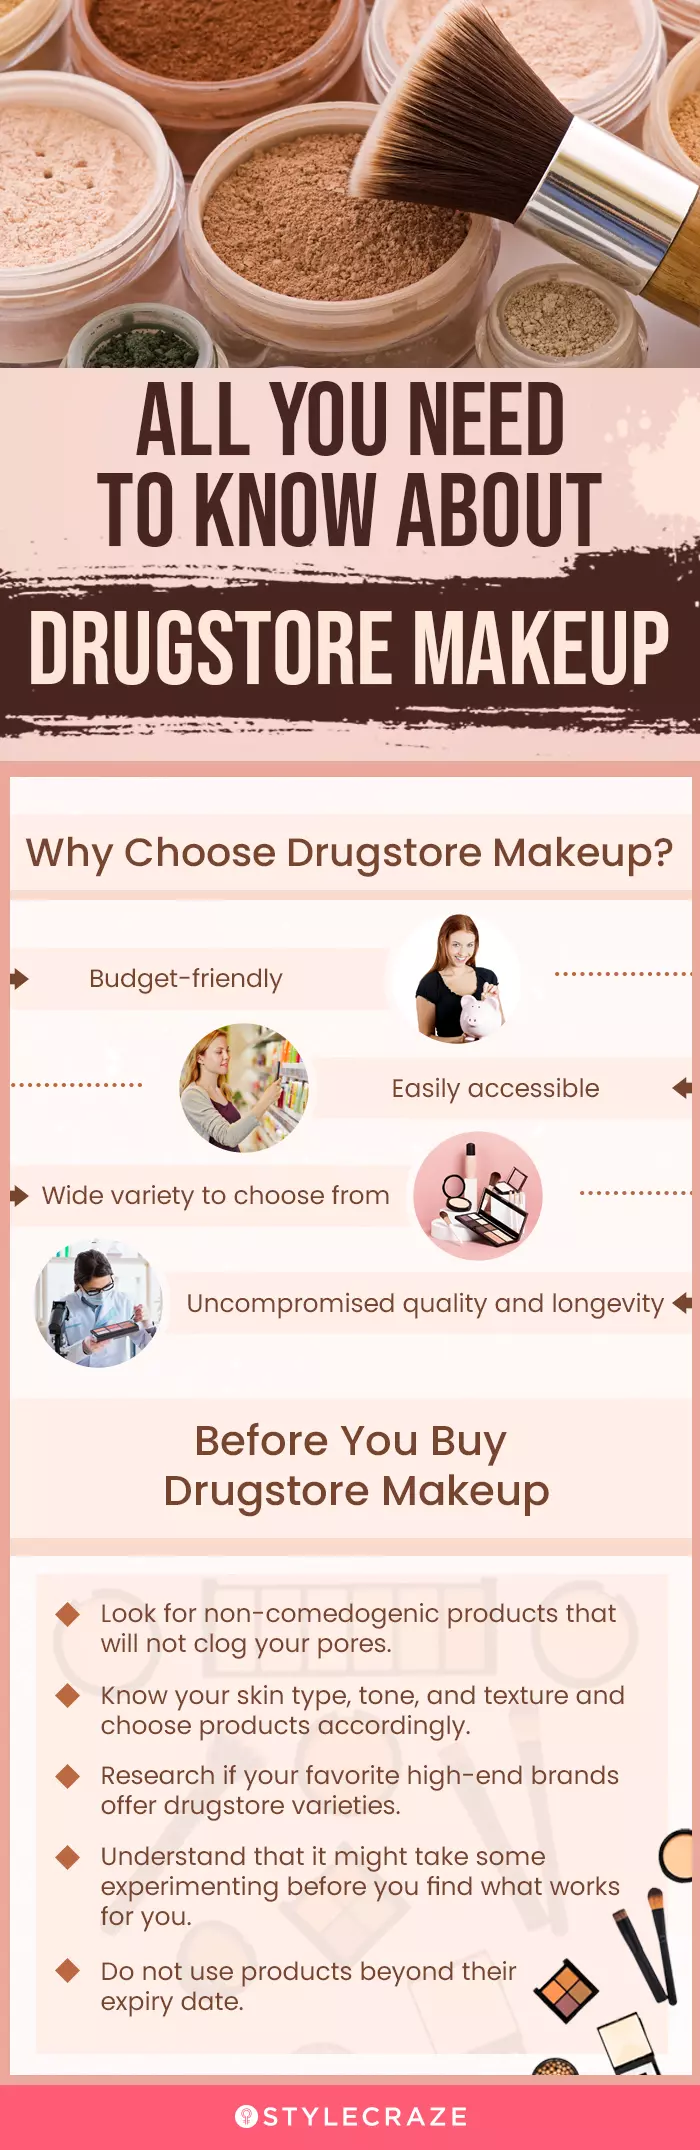 All You Need To Know About Drugstore Makeup (infographic)